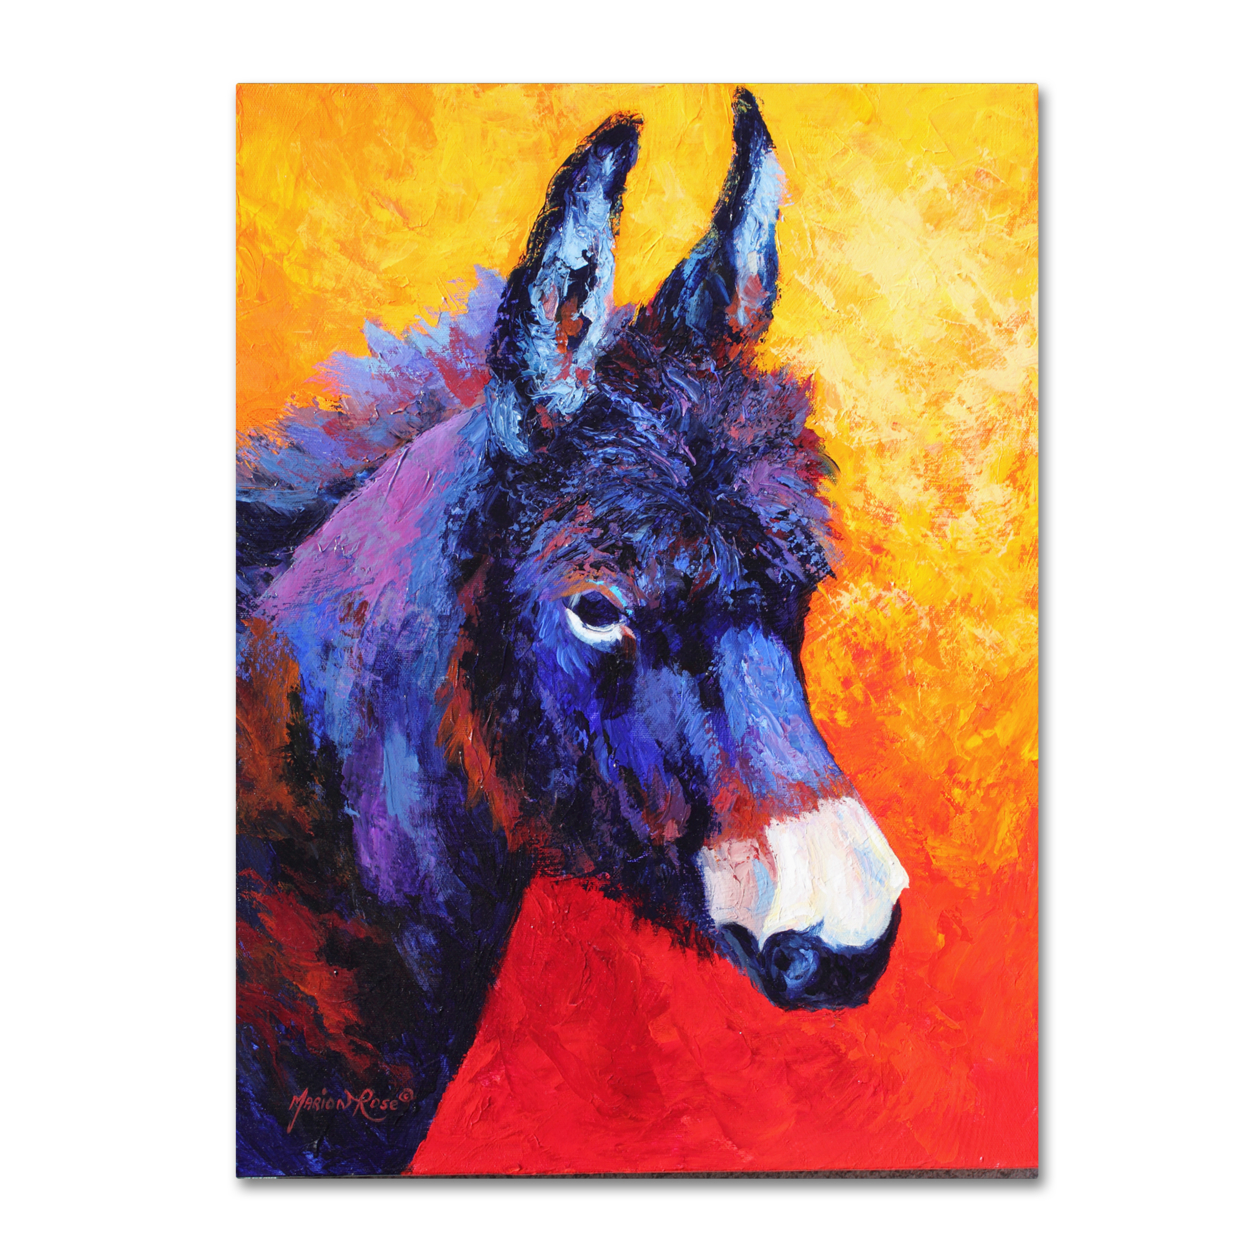 Marion Rose 'Donkey IVX' Ready To Hang Canvas Art 14 X 19 Inches Made In USA